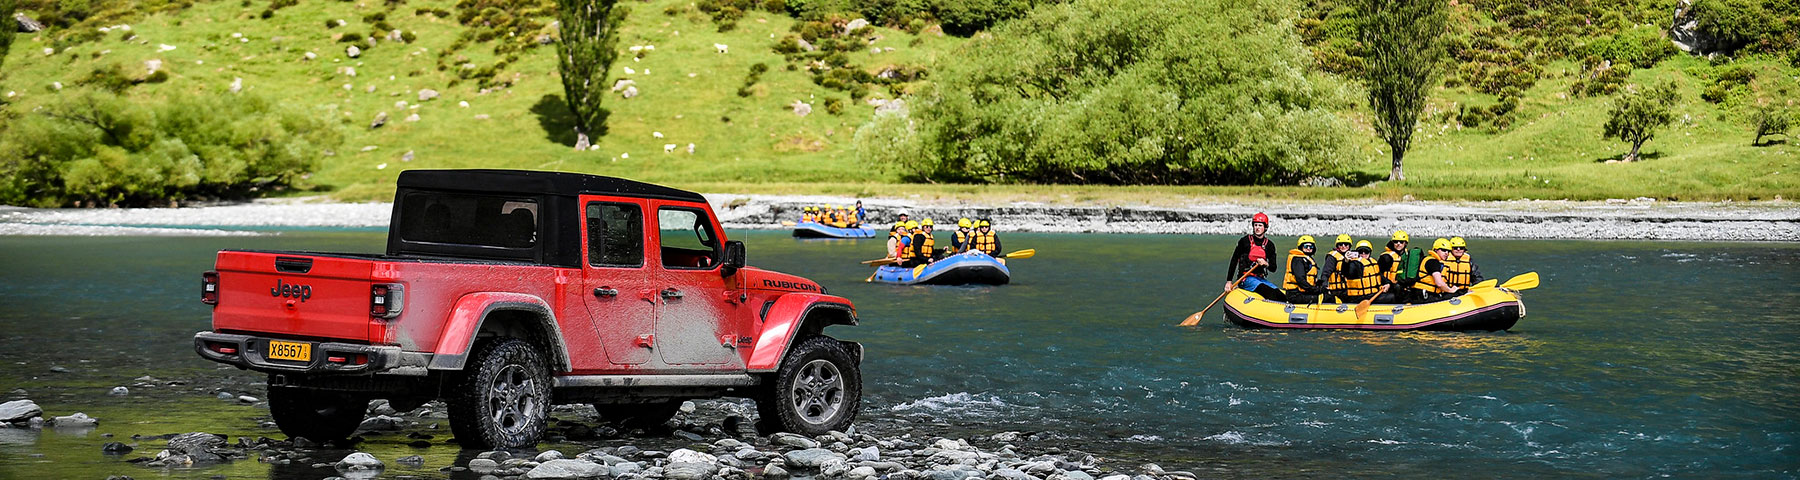 jeep on a river